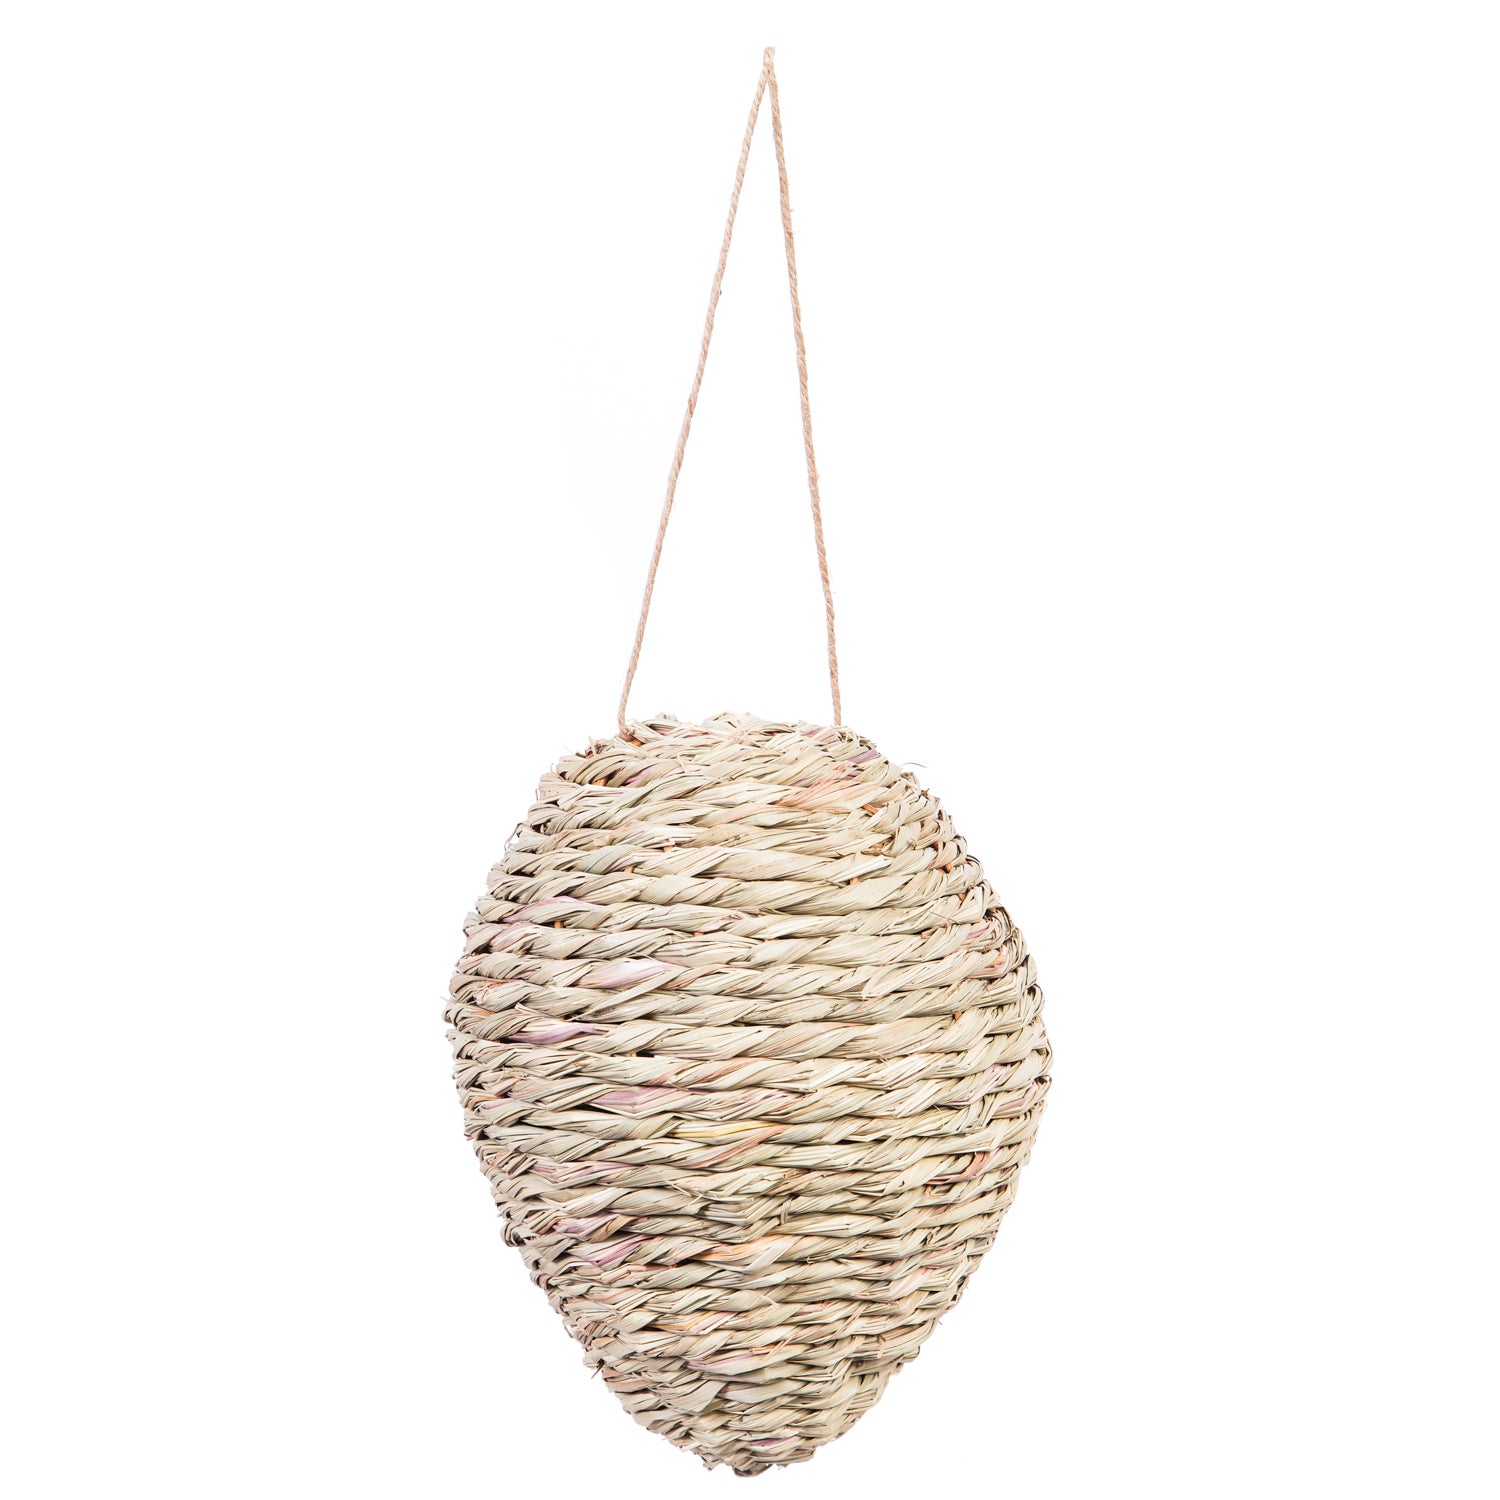 Woven Reed and Rope Hanging Wasp Deterrent